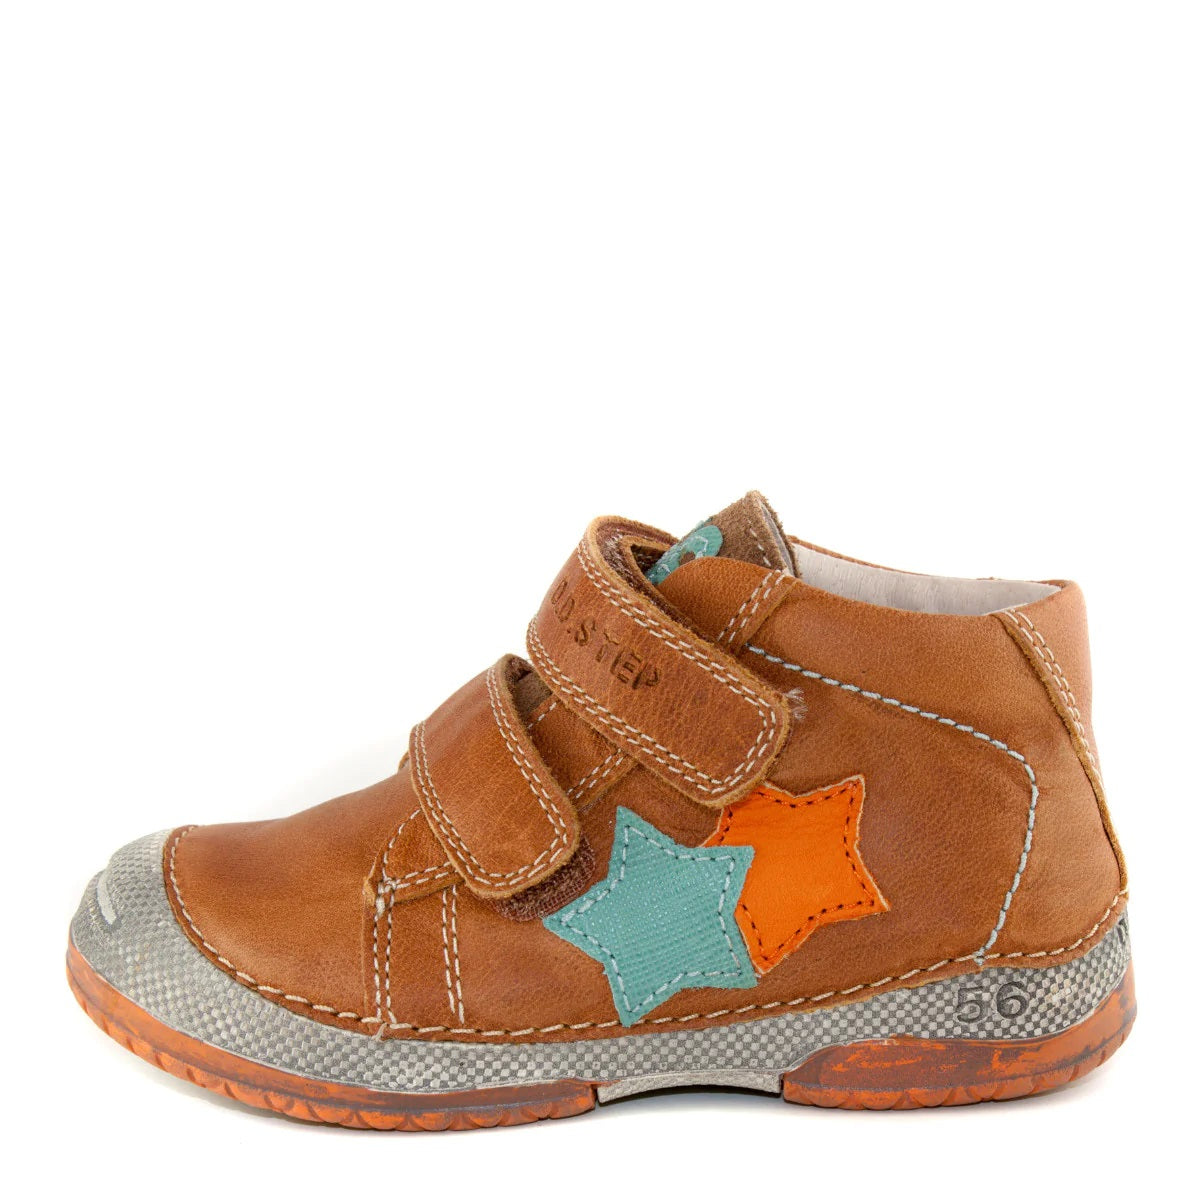 Premium quality first walker with genuine leather lining and upper in brown with blue and orange star on the side. Thanks to its high level of specialization, D.D. Step knows exactly what your child’s feet need, to develop properly in the various phases of growth. The exceptional comfort these shoes provide assure the well-being and happiness of your child.